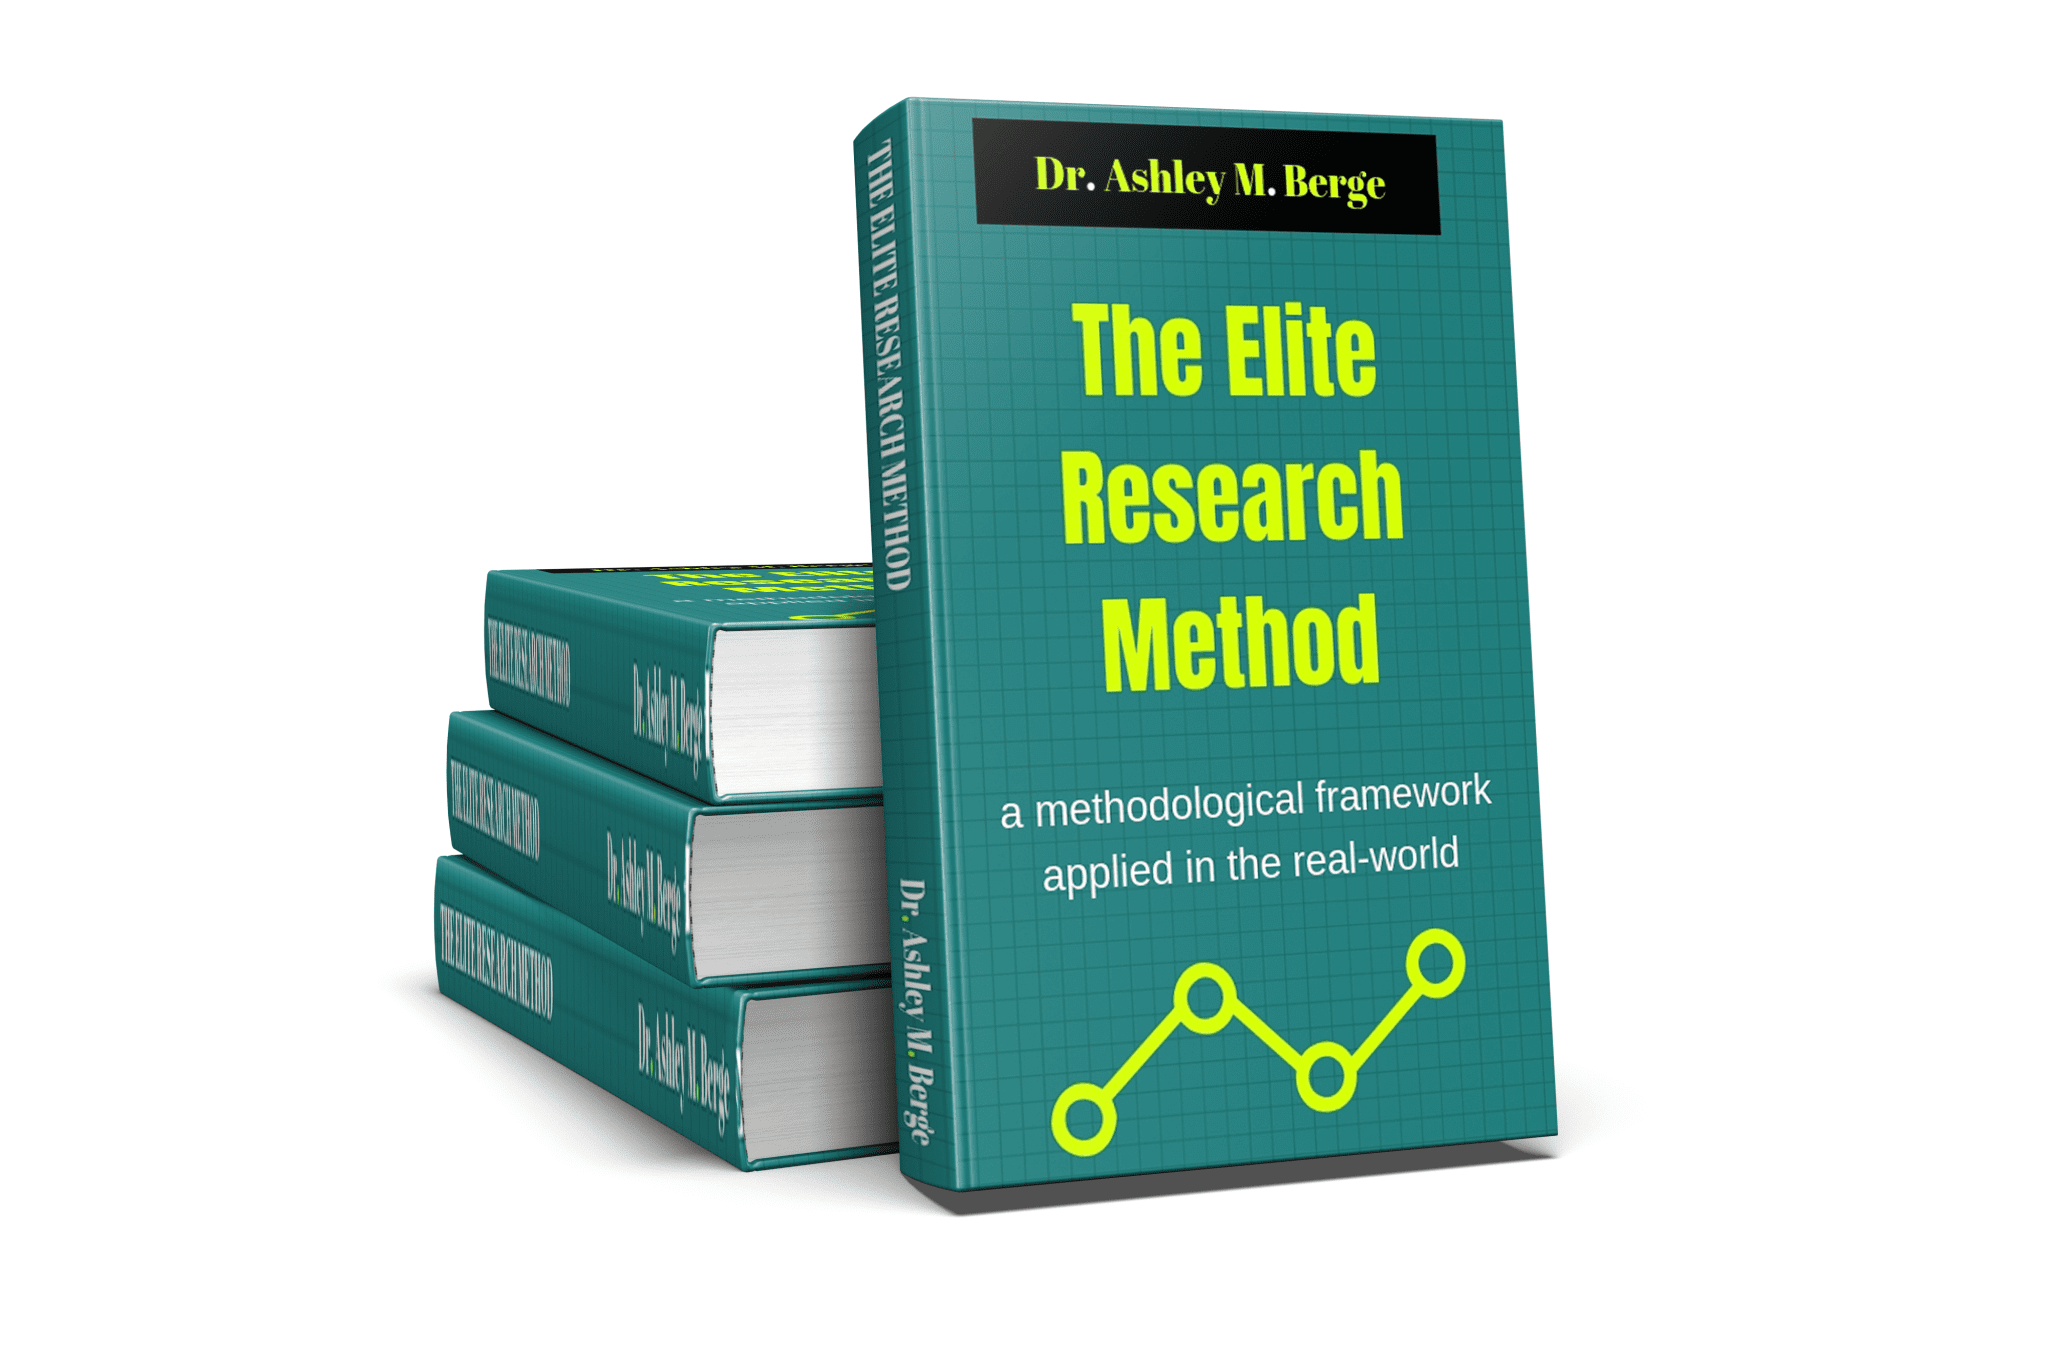 The Elite Research <a href="https://am8international.com/product/the-elite-research-method/" data-type="product" data-id="15187" rel="nofollow">Method</a>